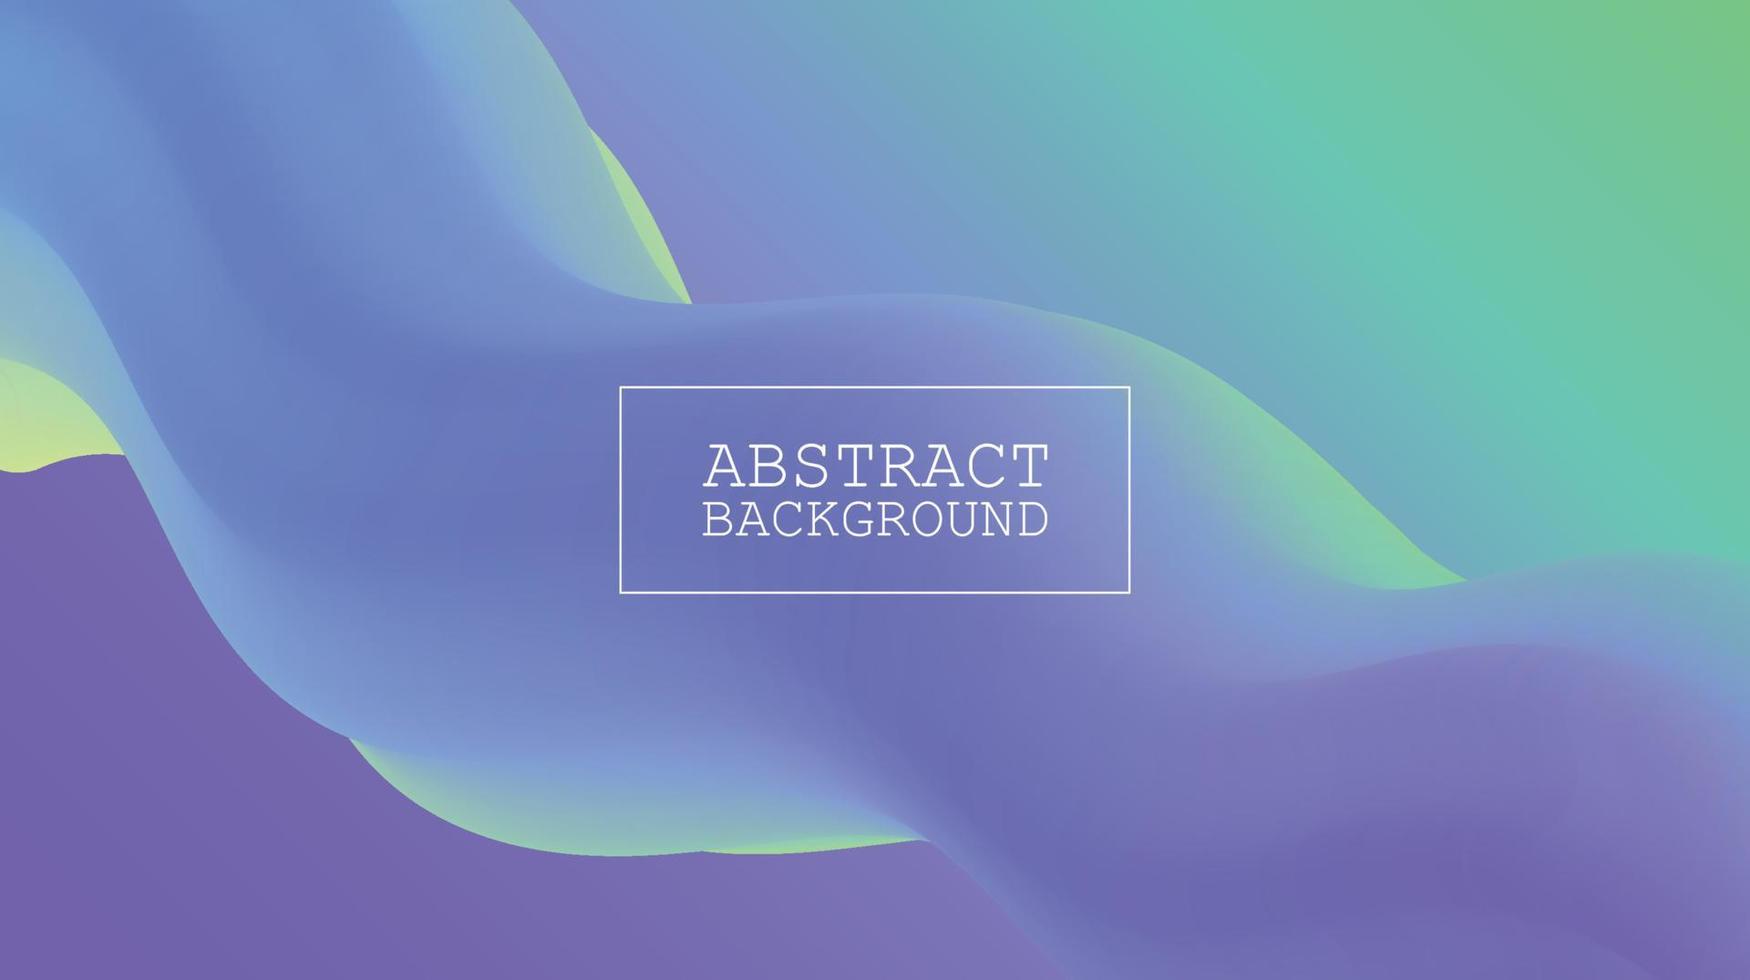 Abstract background with bright colorful dynamic shapes vector